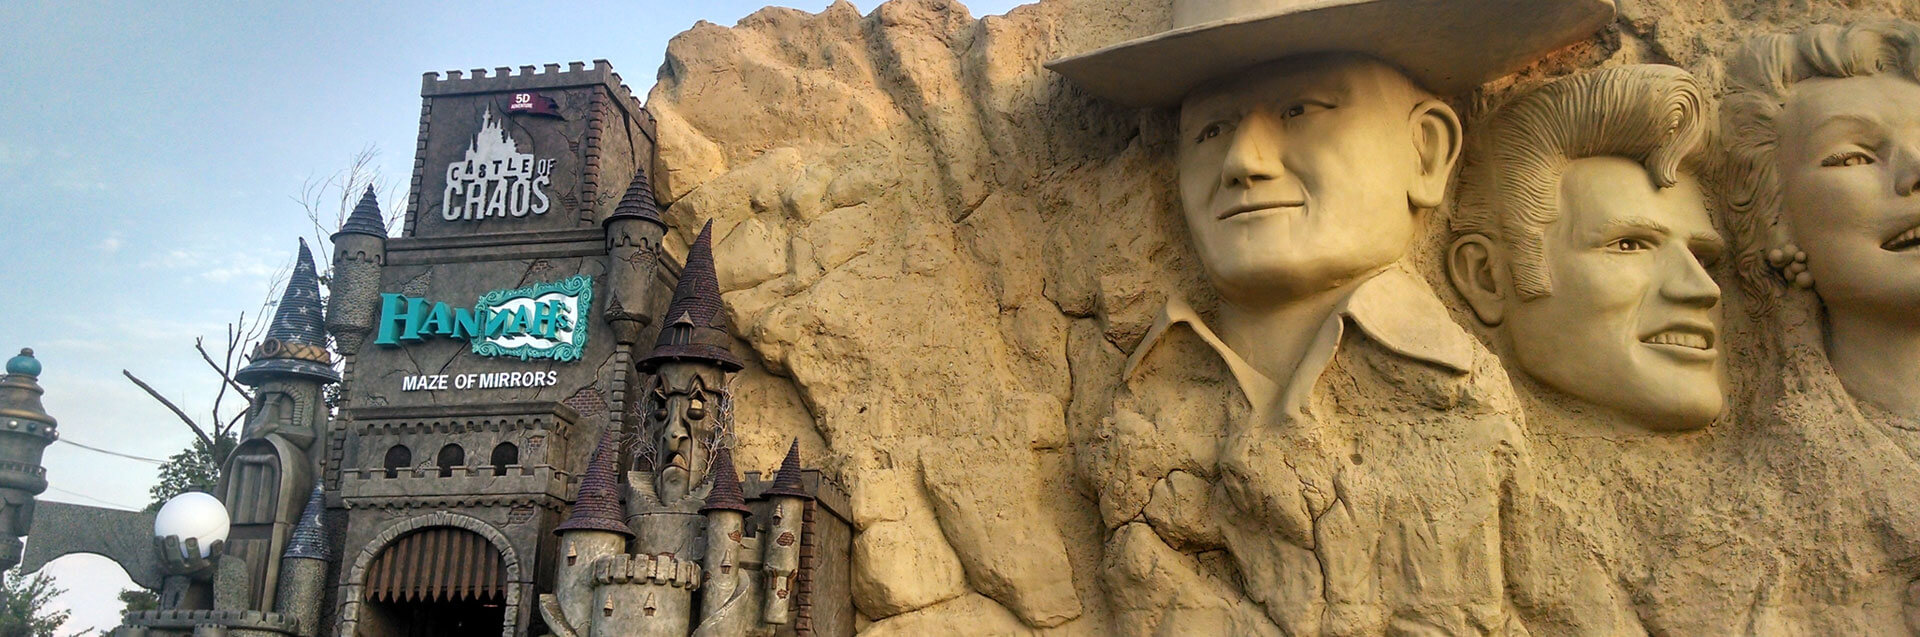 Castles and Monuments galore at miniature golf in Branson, Missouri.